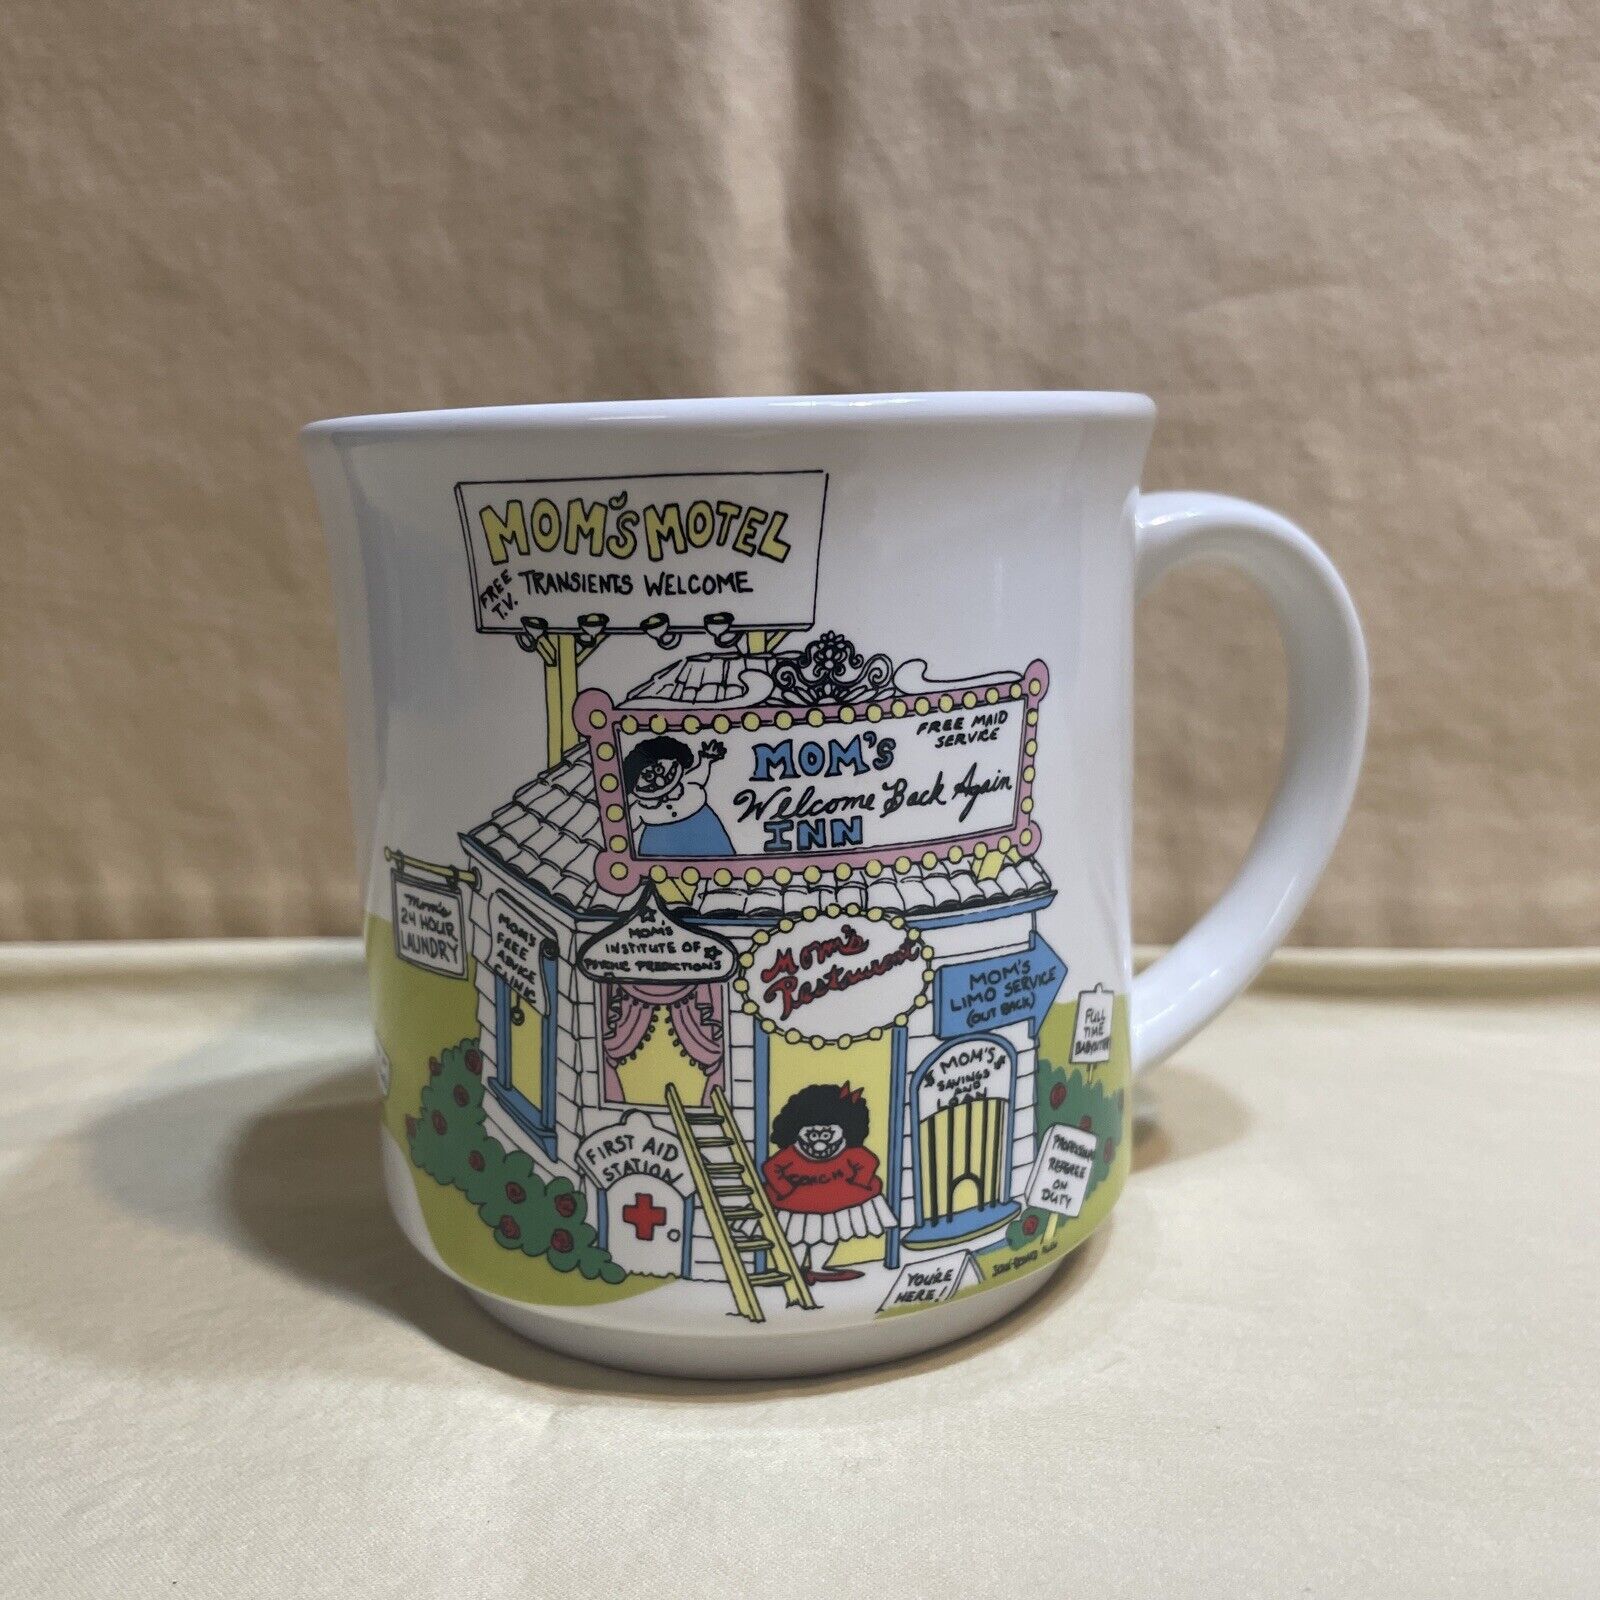 Vintage Recycled Paper Product Coffee Mug Moms Motel Hotel Mother Funny 